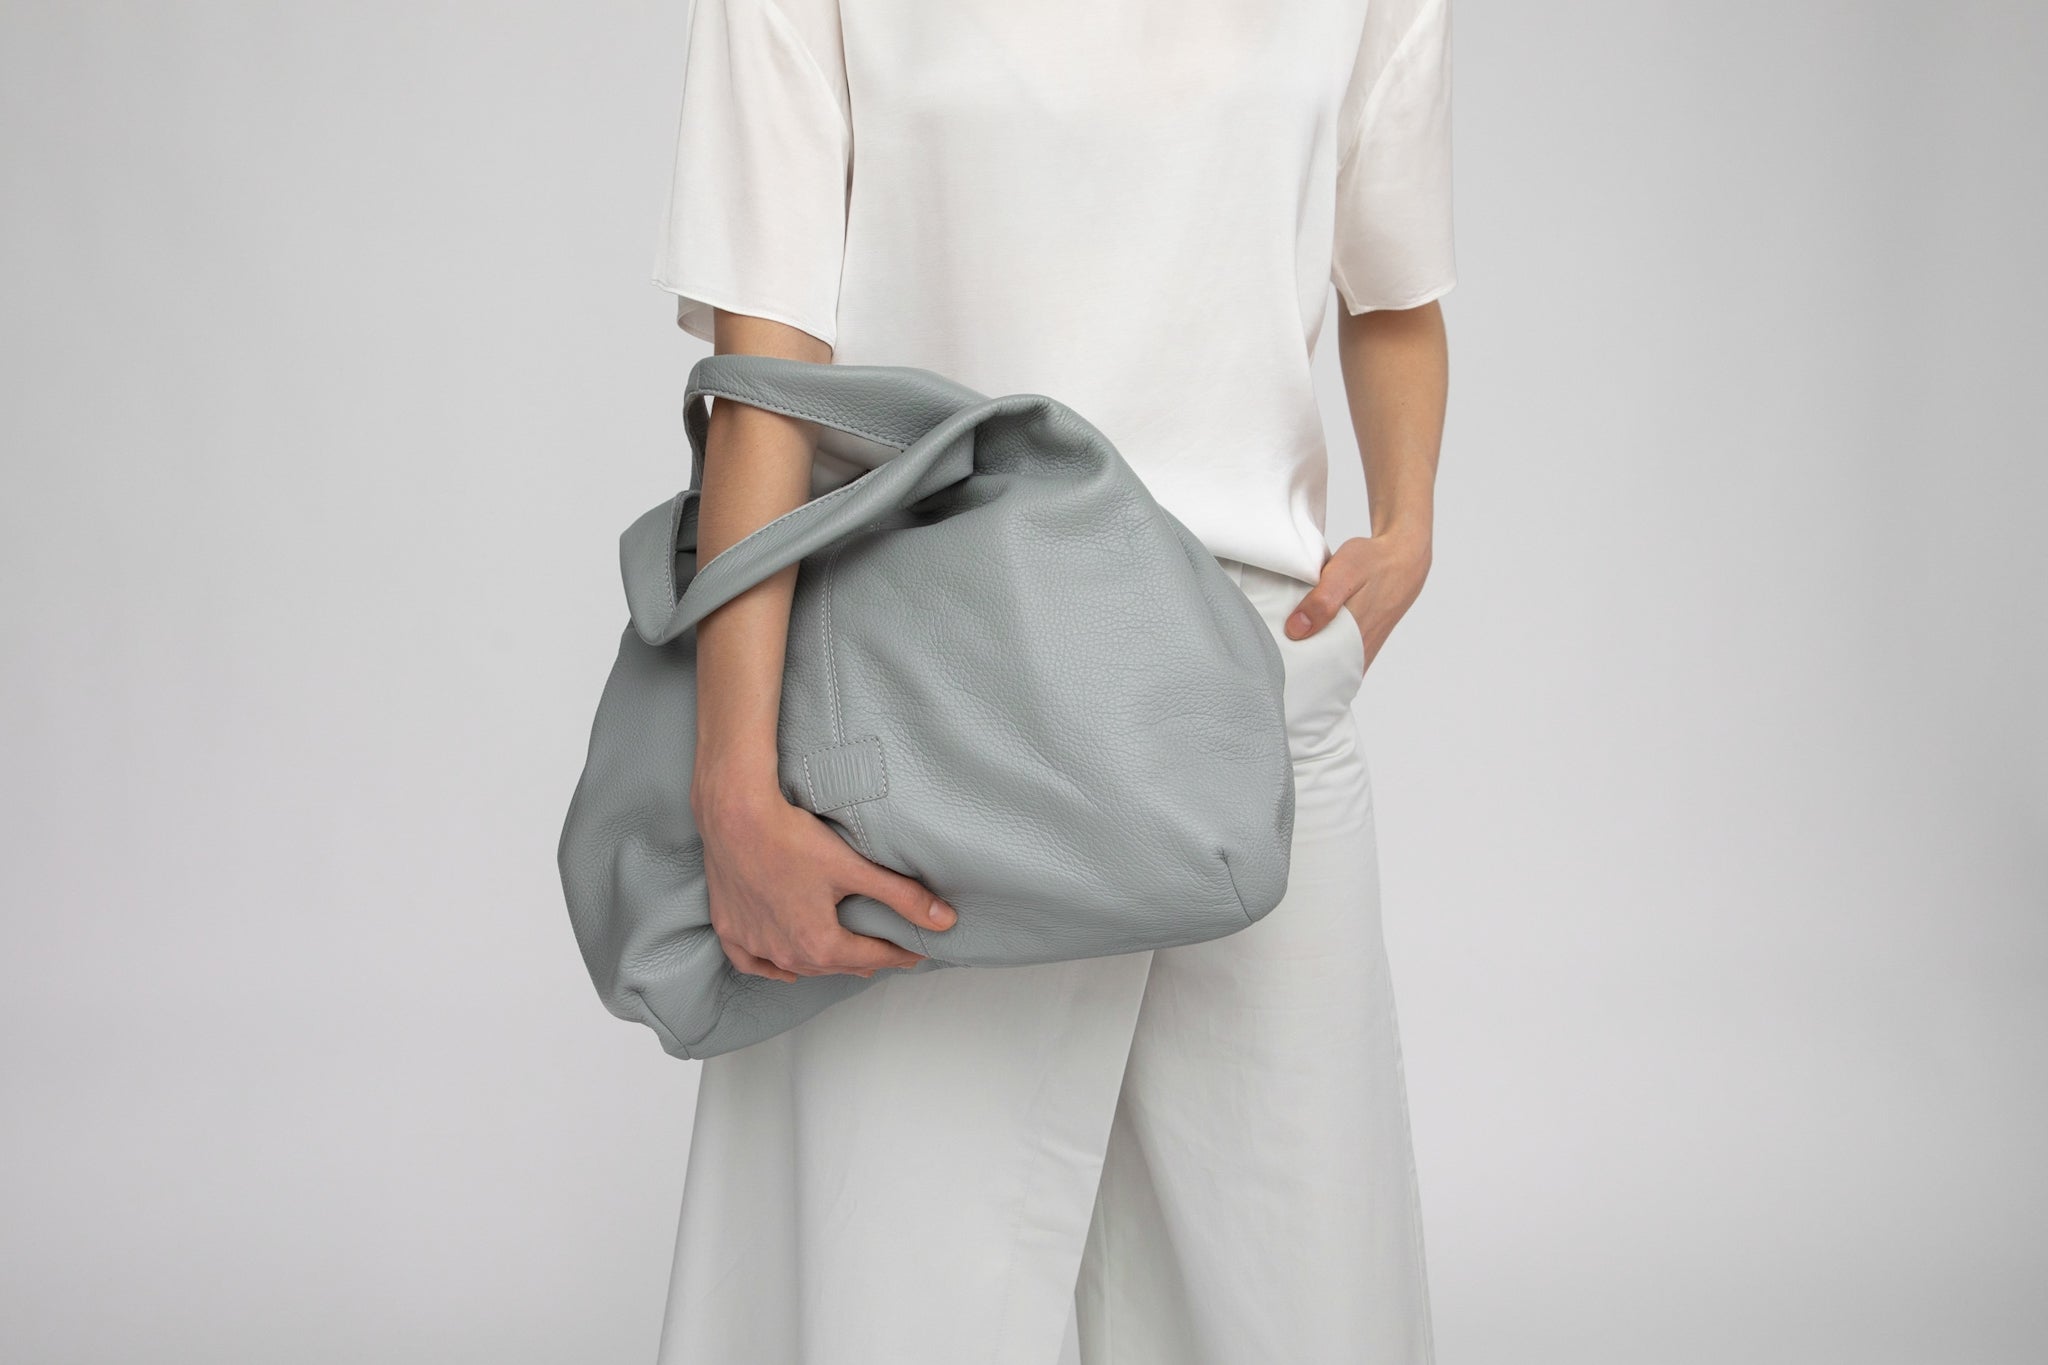 Philini's stylish hobo bag is crafted in grey leather